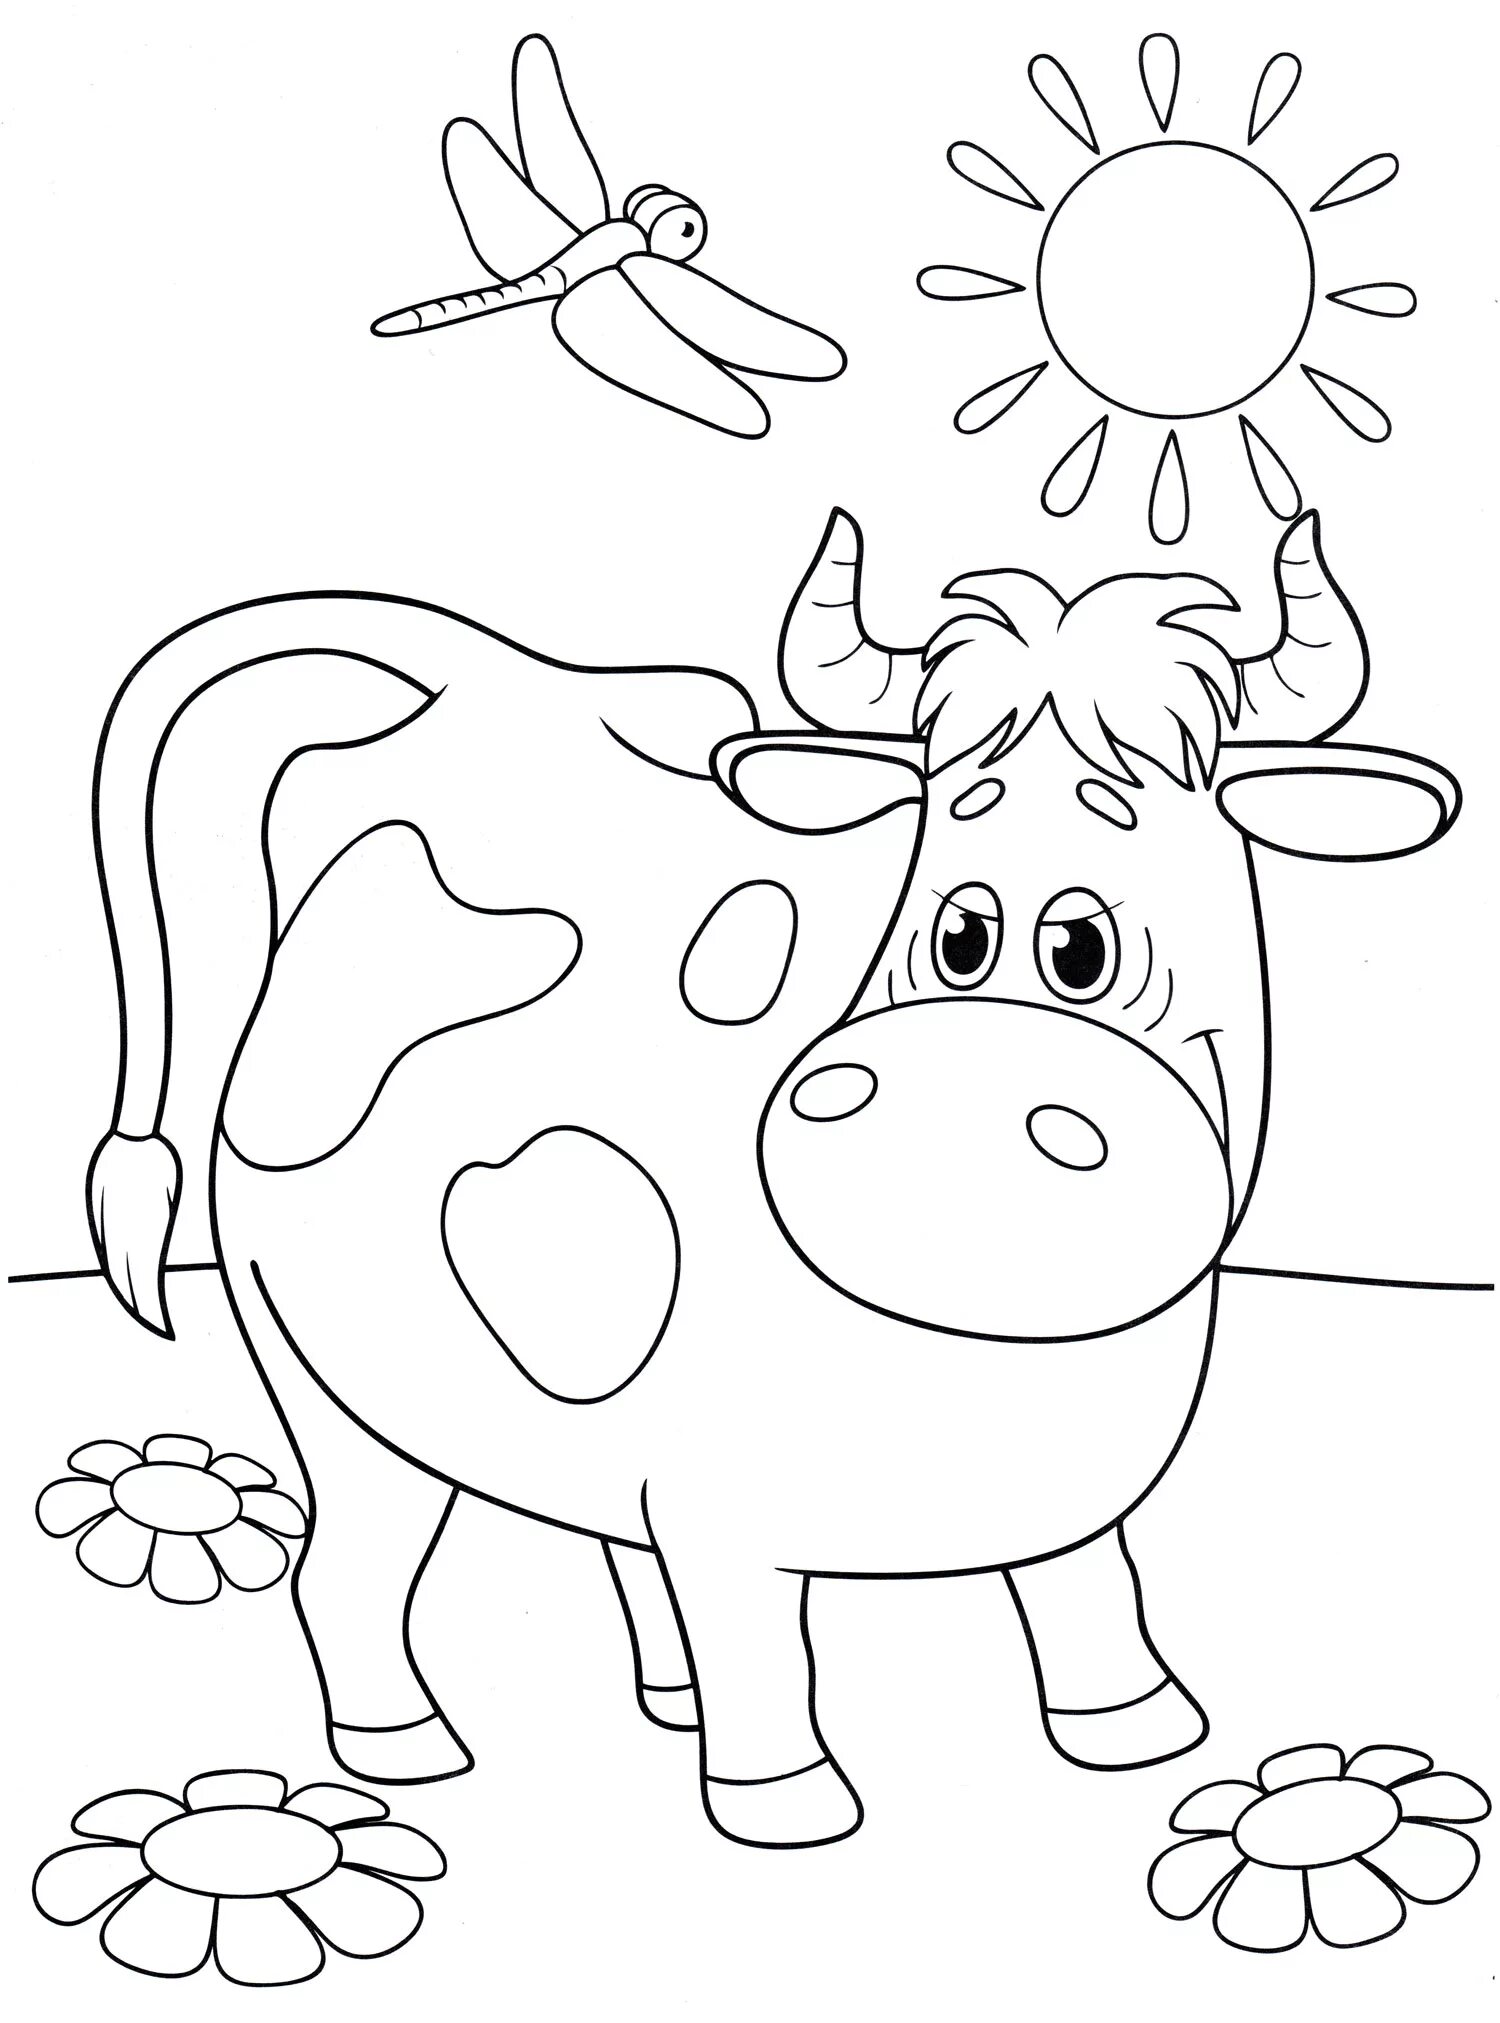 Cow for kids #16